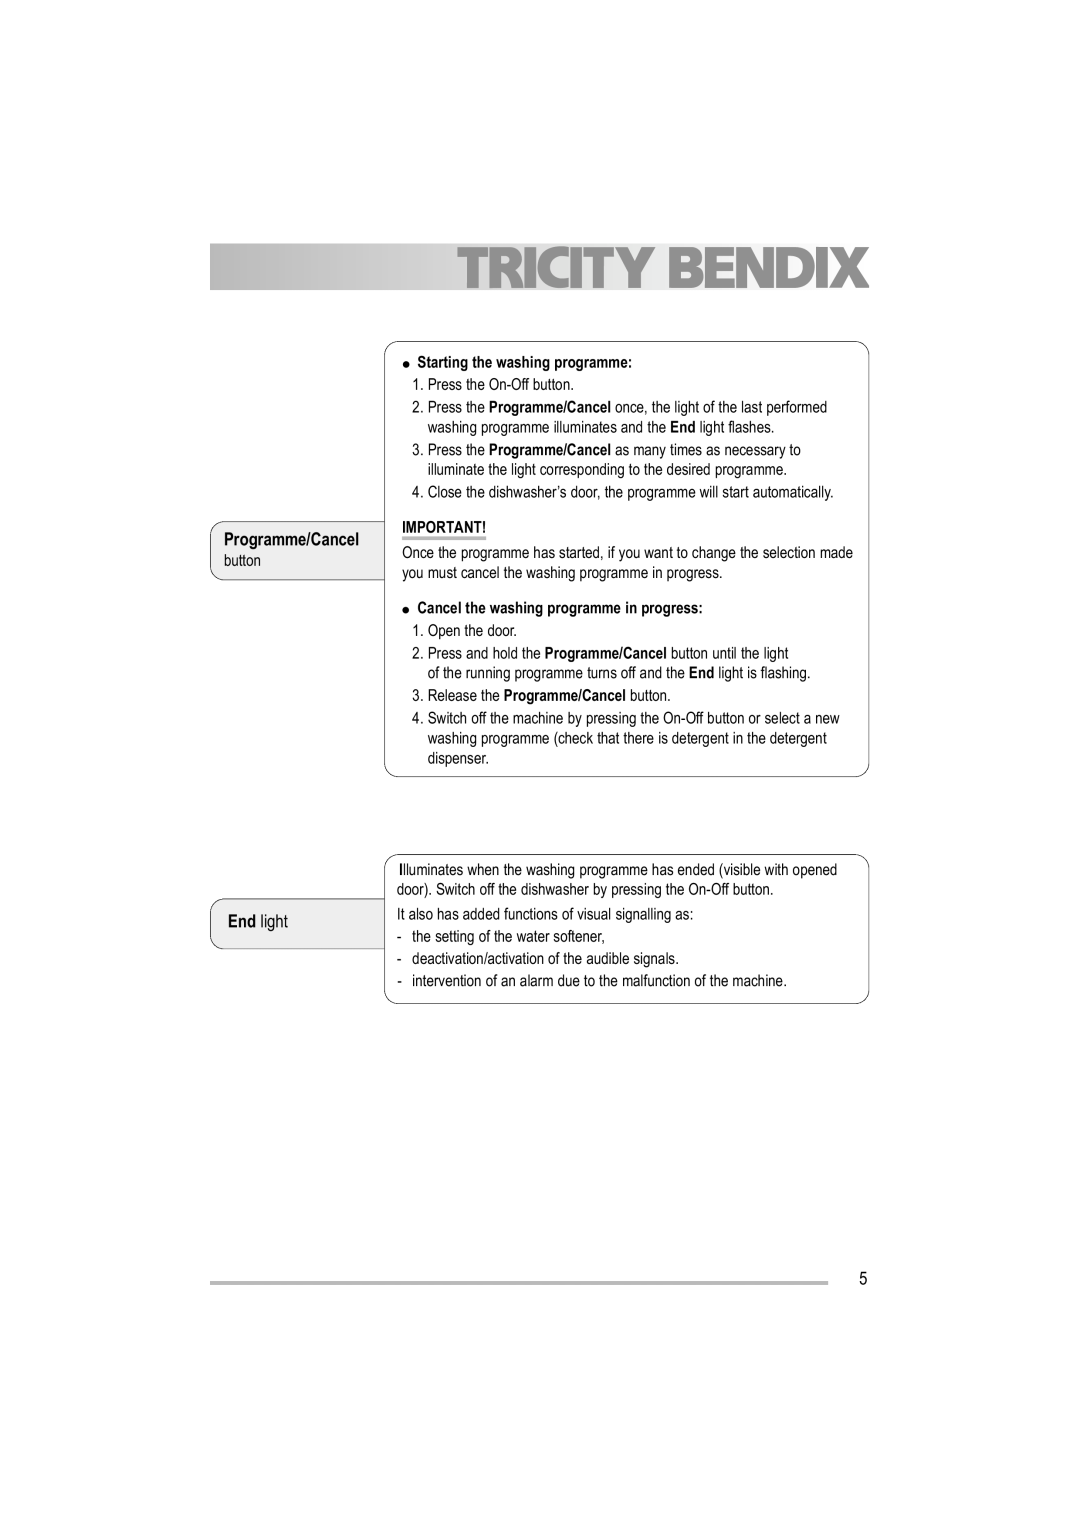 Tricity Bendix TBDW 32 manual Programme/Cancel, End light, Starting the washing programme 